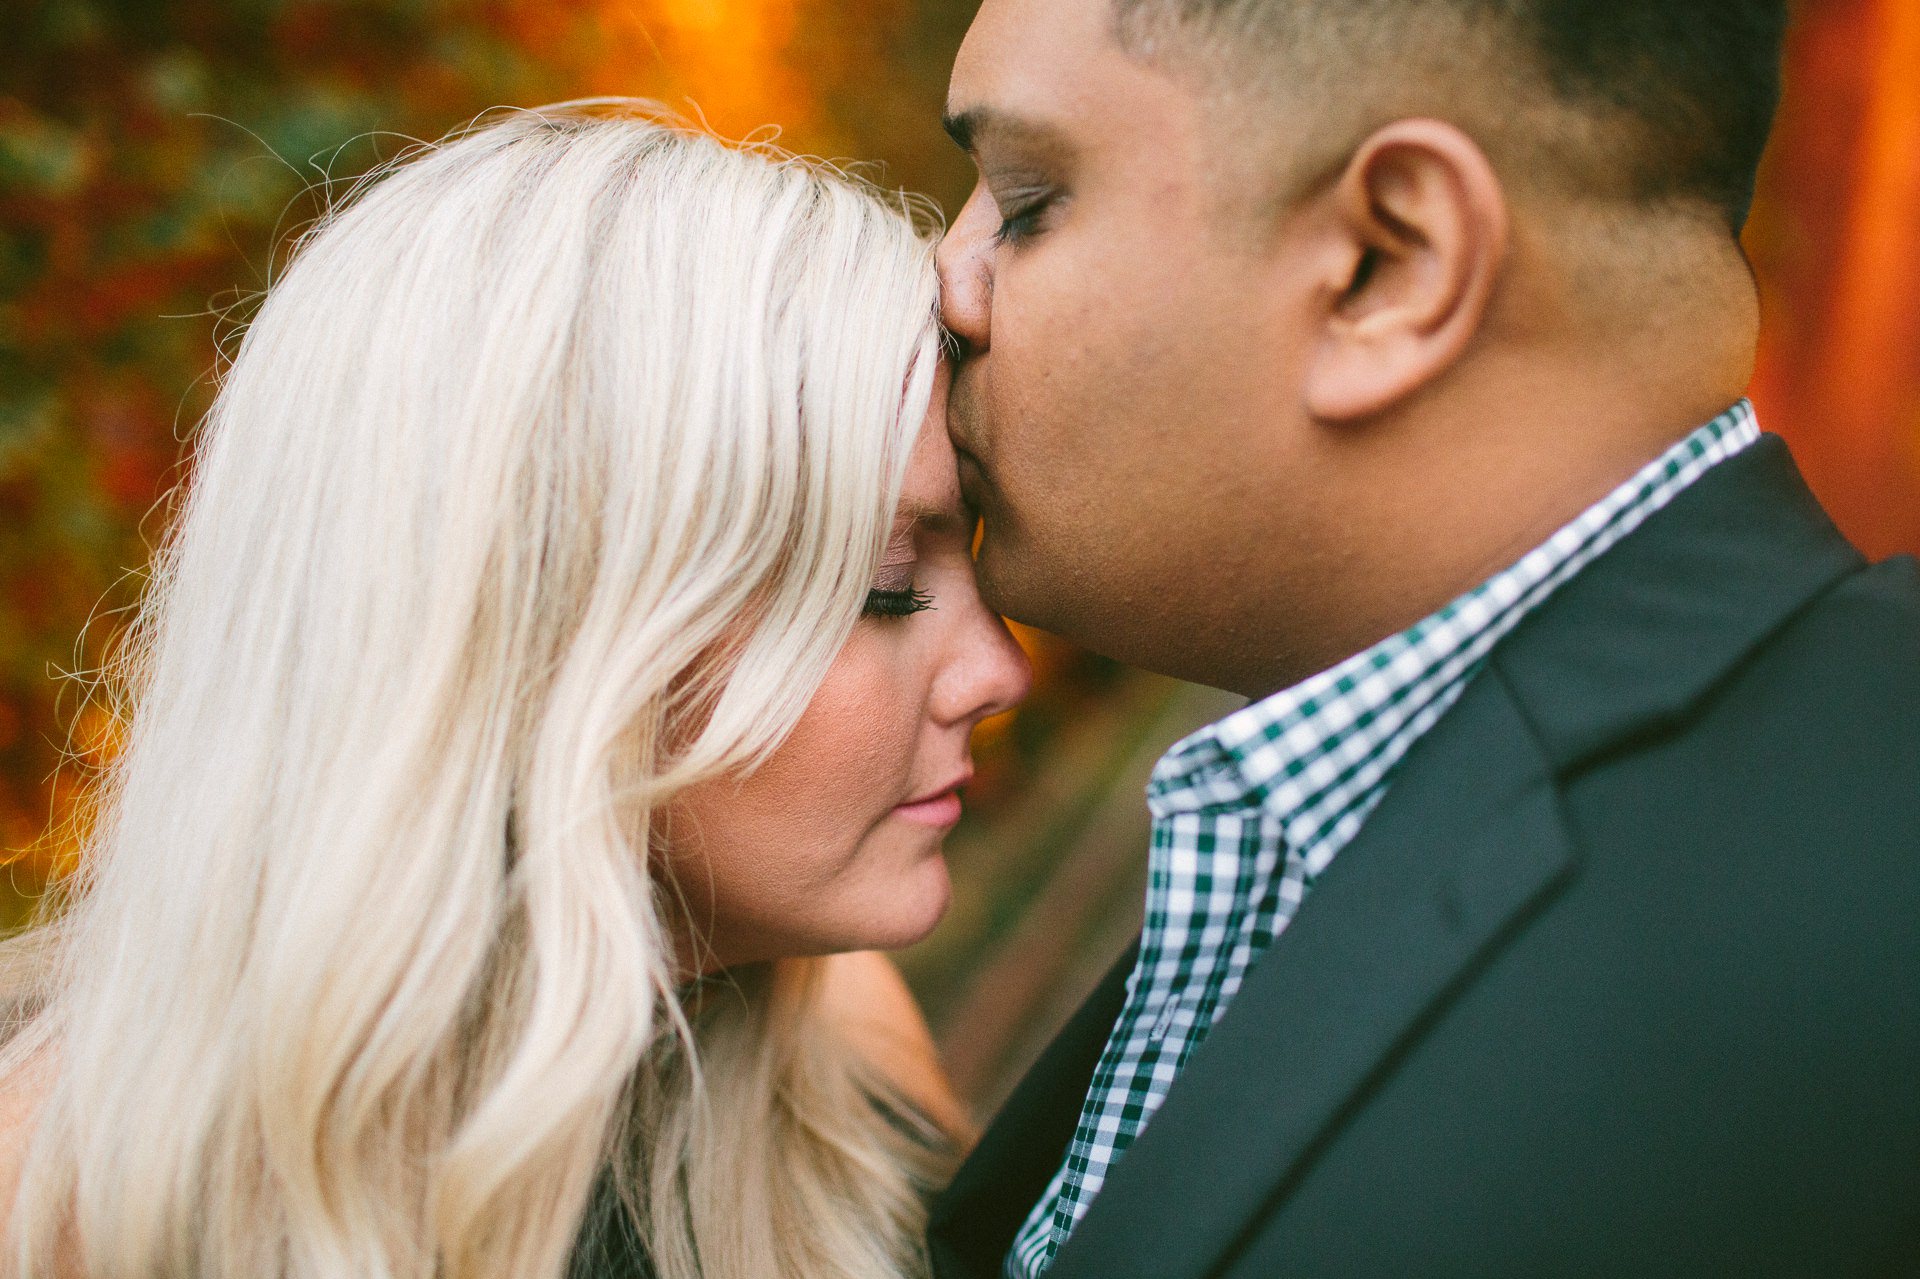 Edgewater Beach Engagement Session in Cleveland 13.jpg